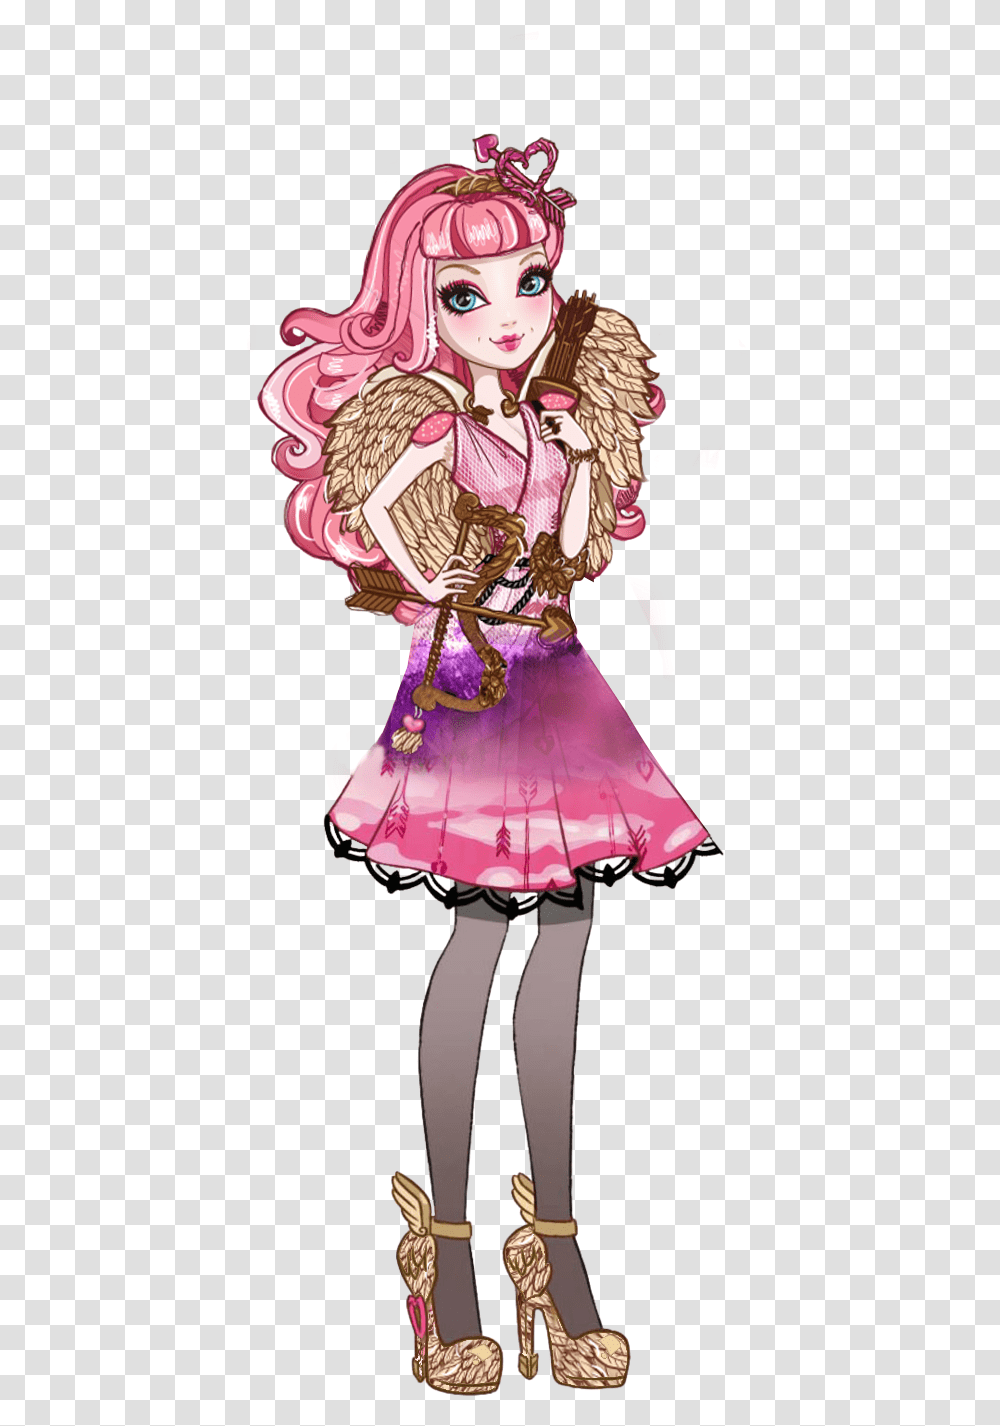 Cupid From Monster High And Ever After High, Doll, Toy, Manga, Comics Transparent Png